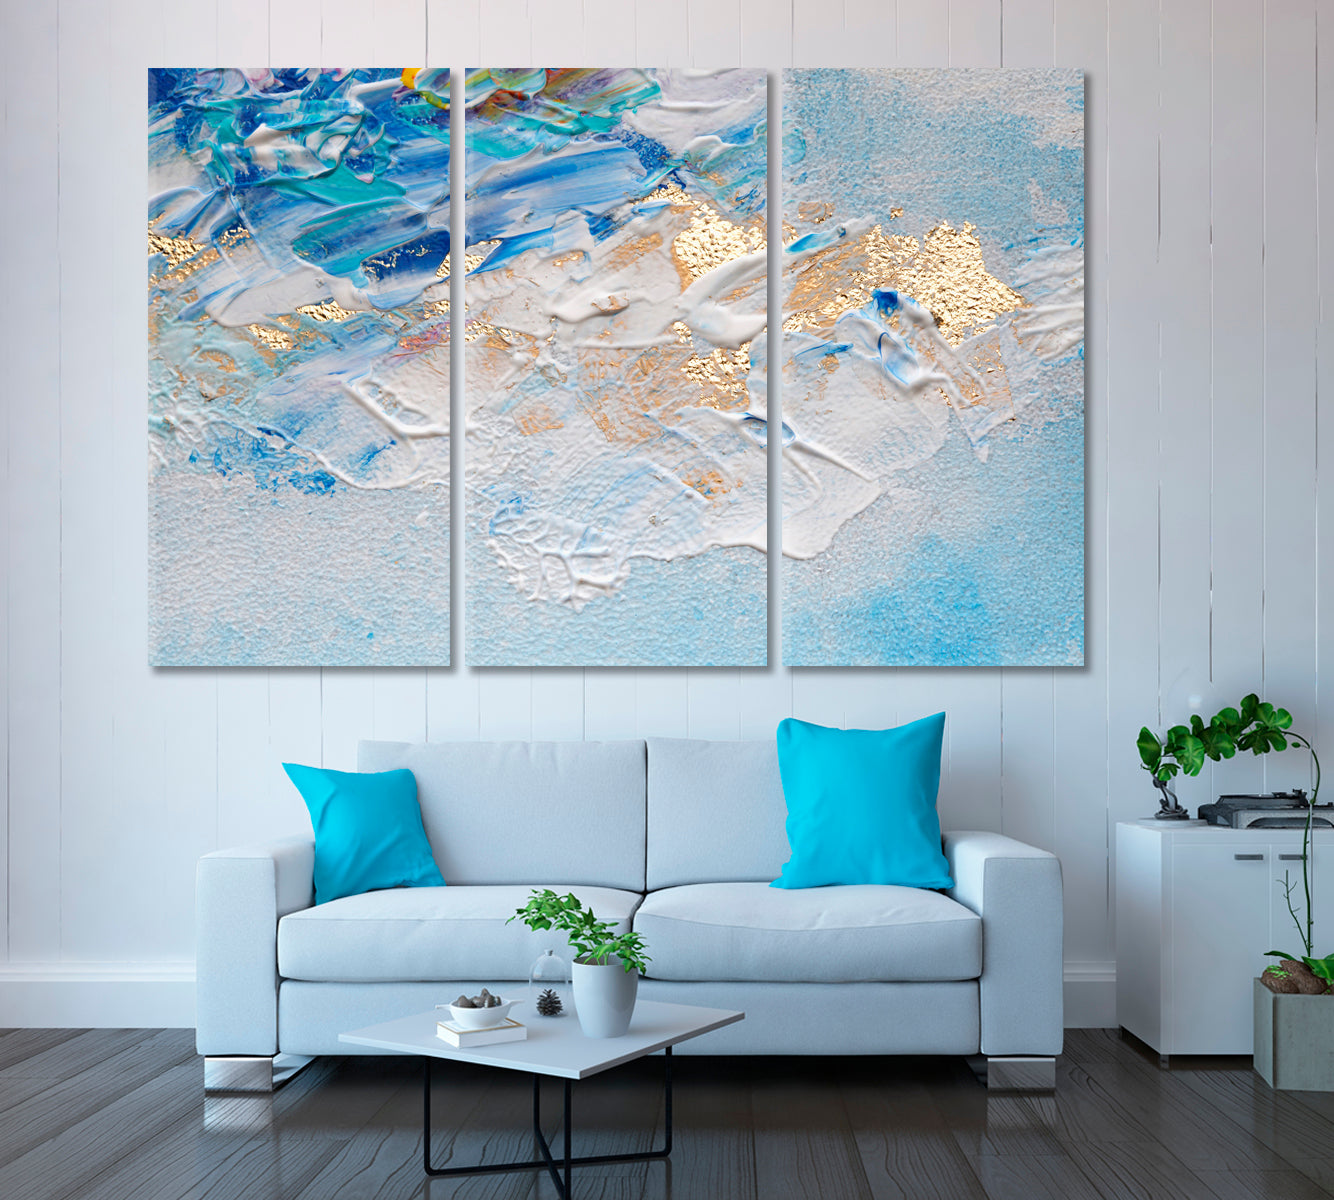 Creative Blue & Gold Painting Canvas Print ArtLexy 3 Panels 36"x24" inches 